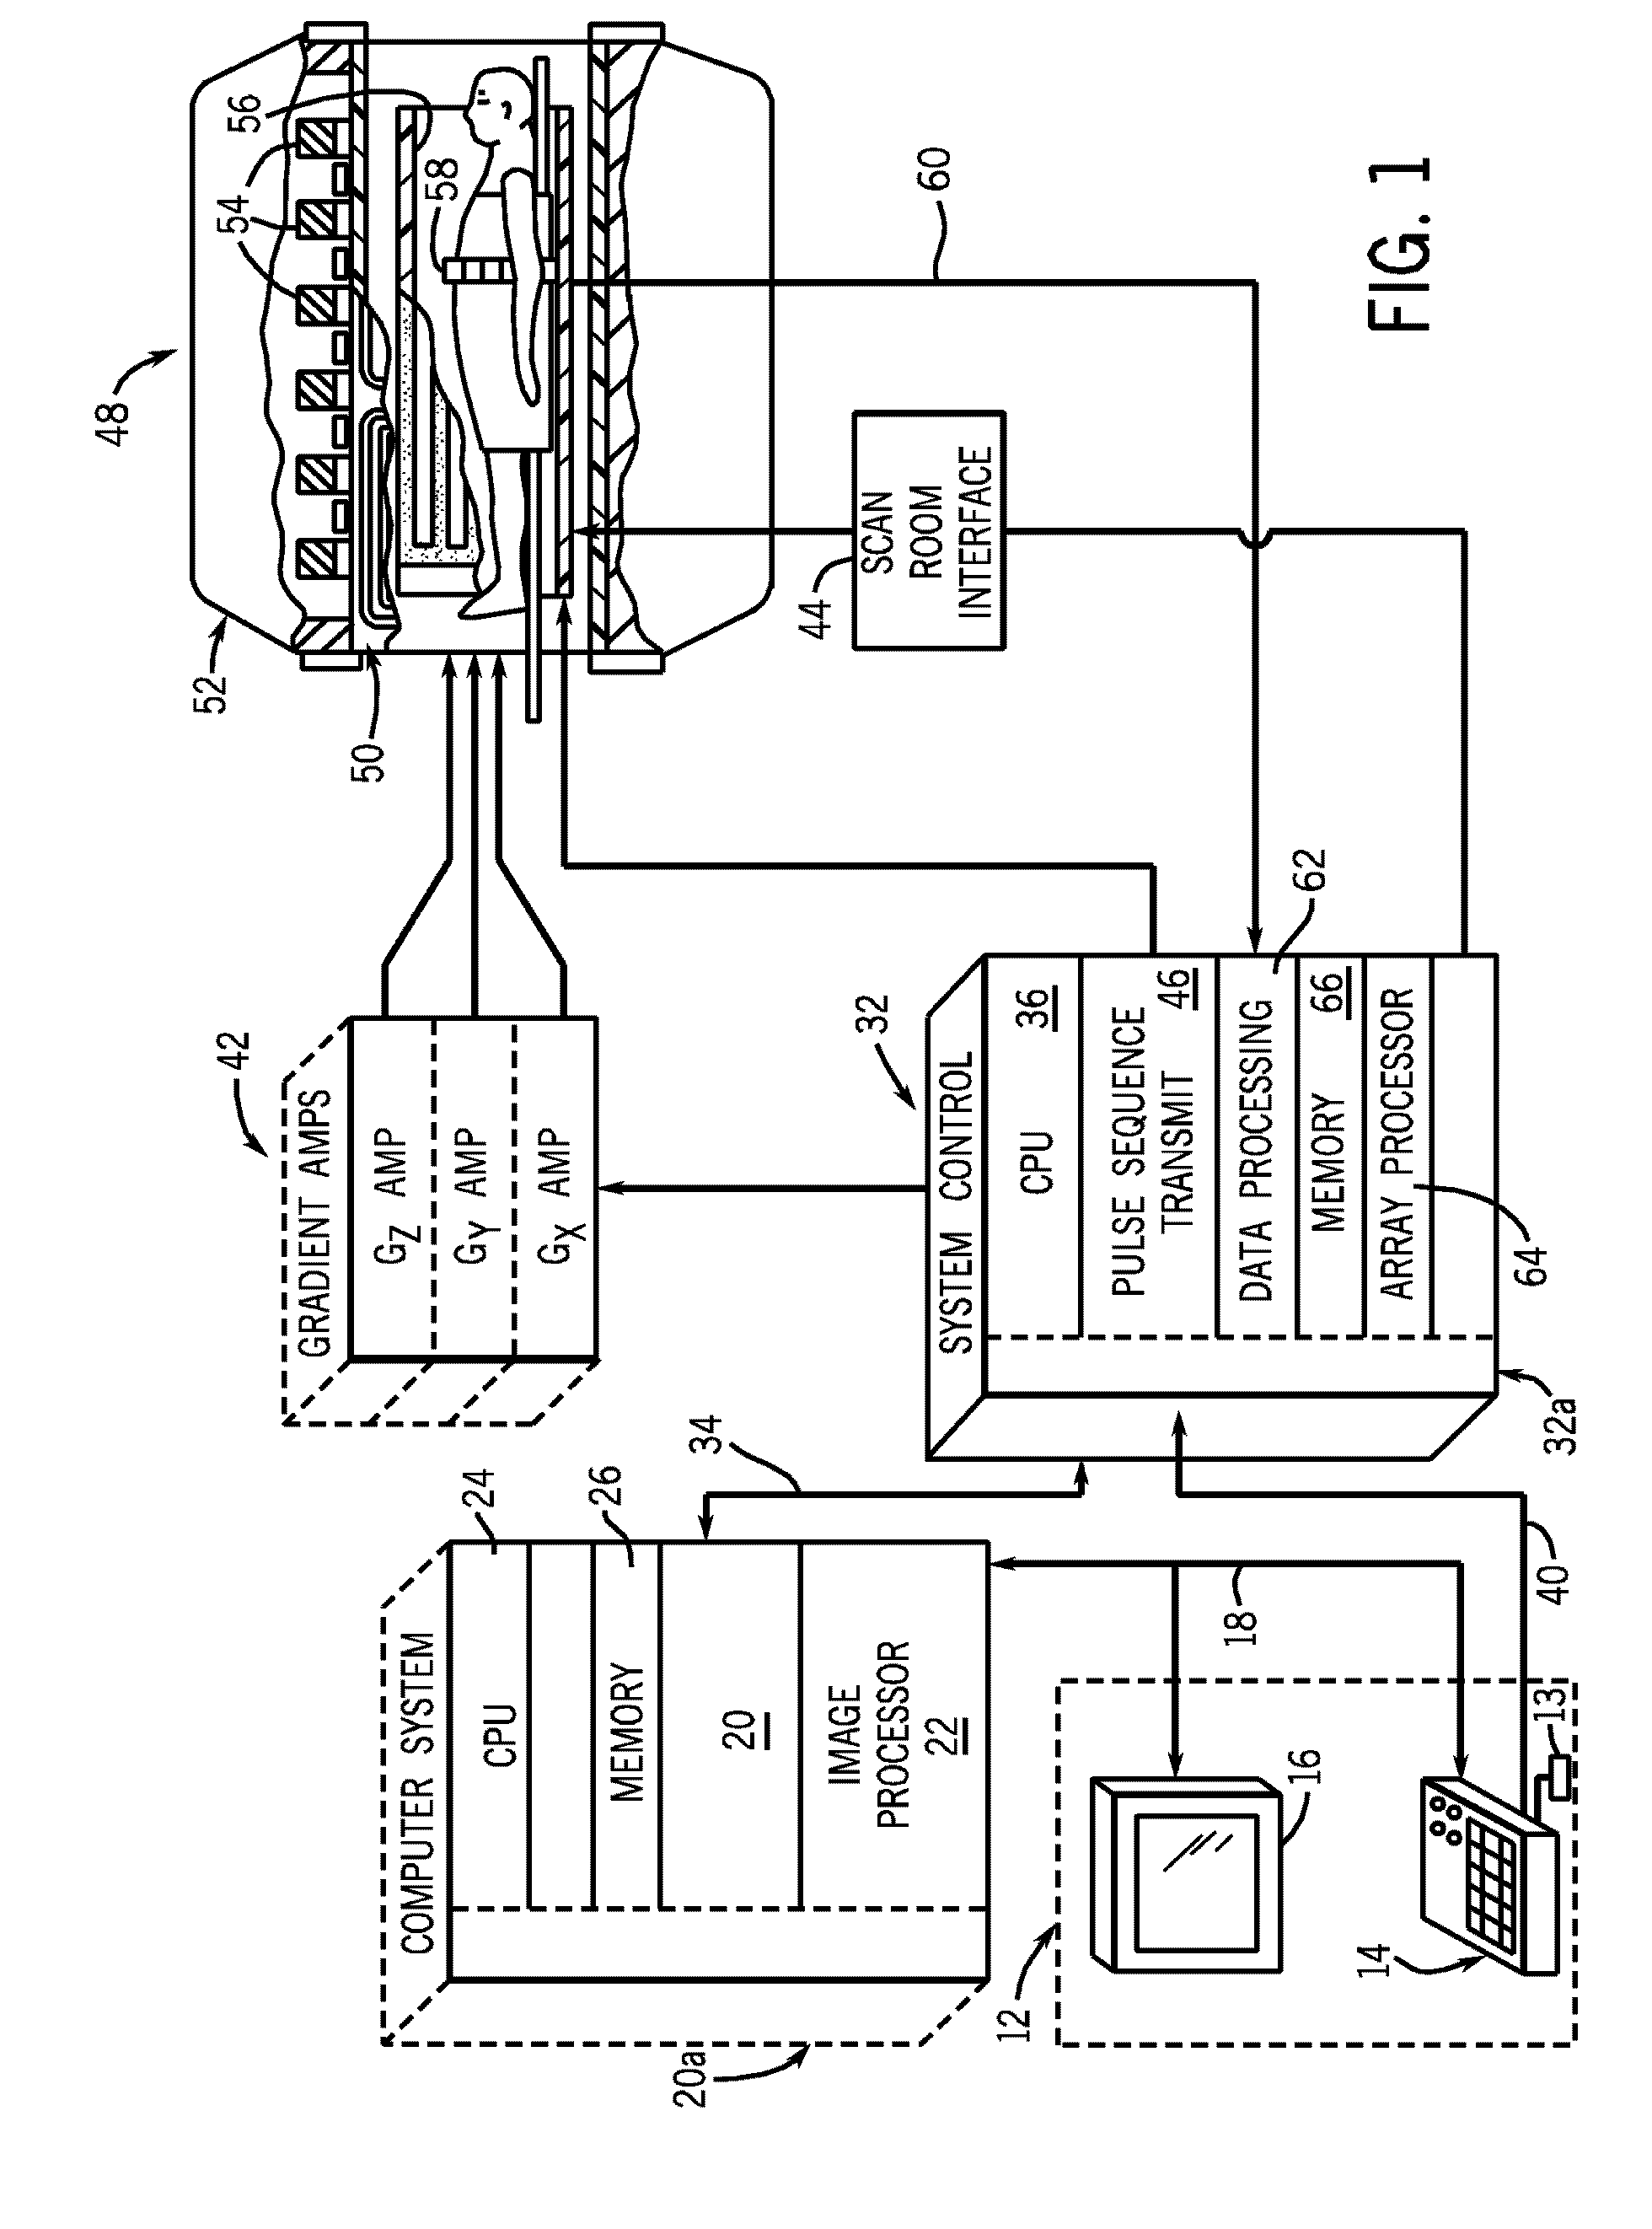 System and method for fast mr coil sensitivity mapping